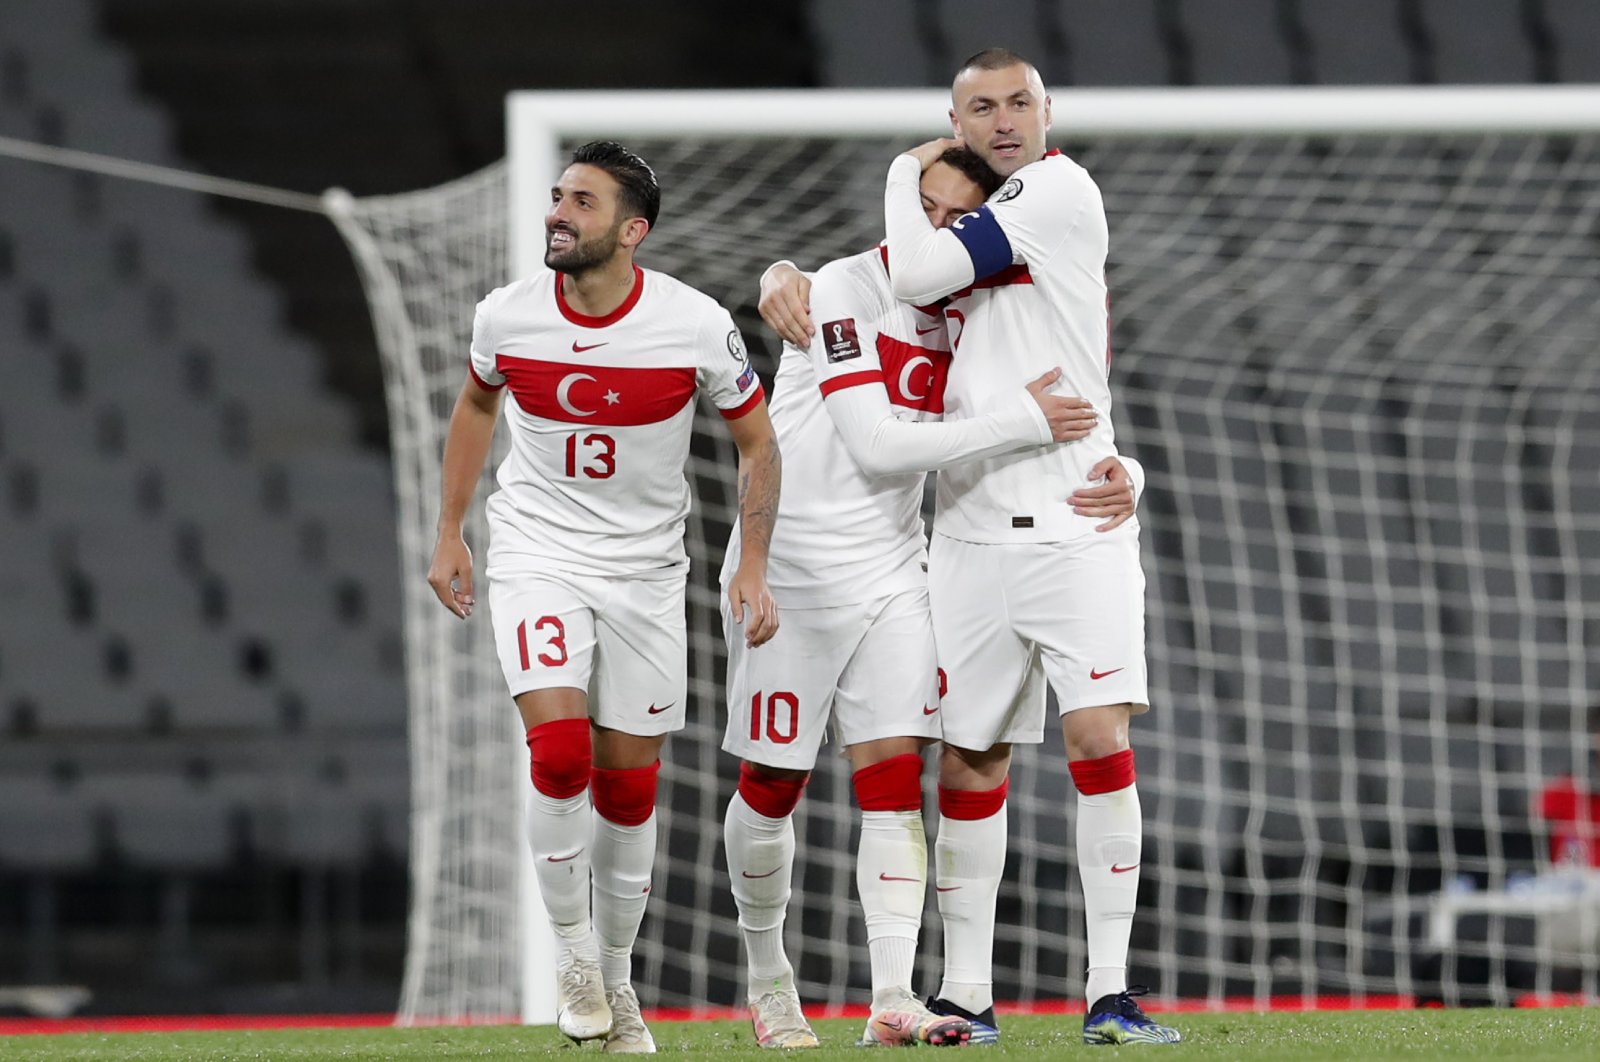 Turkey players celebrate a goal during a World Cup 2022 qualifying match against the Netherlands at the Atatürk Olympic Stadium, in Istanbul, Turkey, March 24, 2021. (AP Photo)